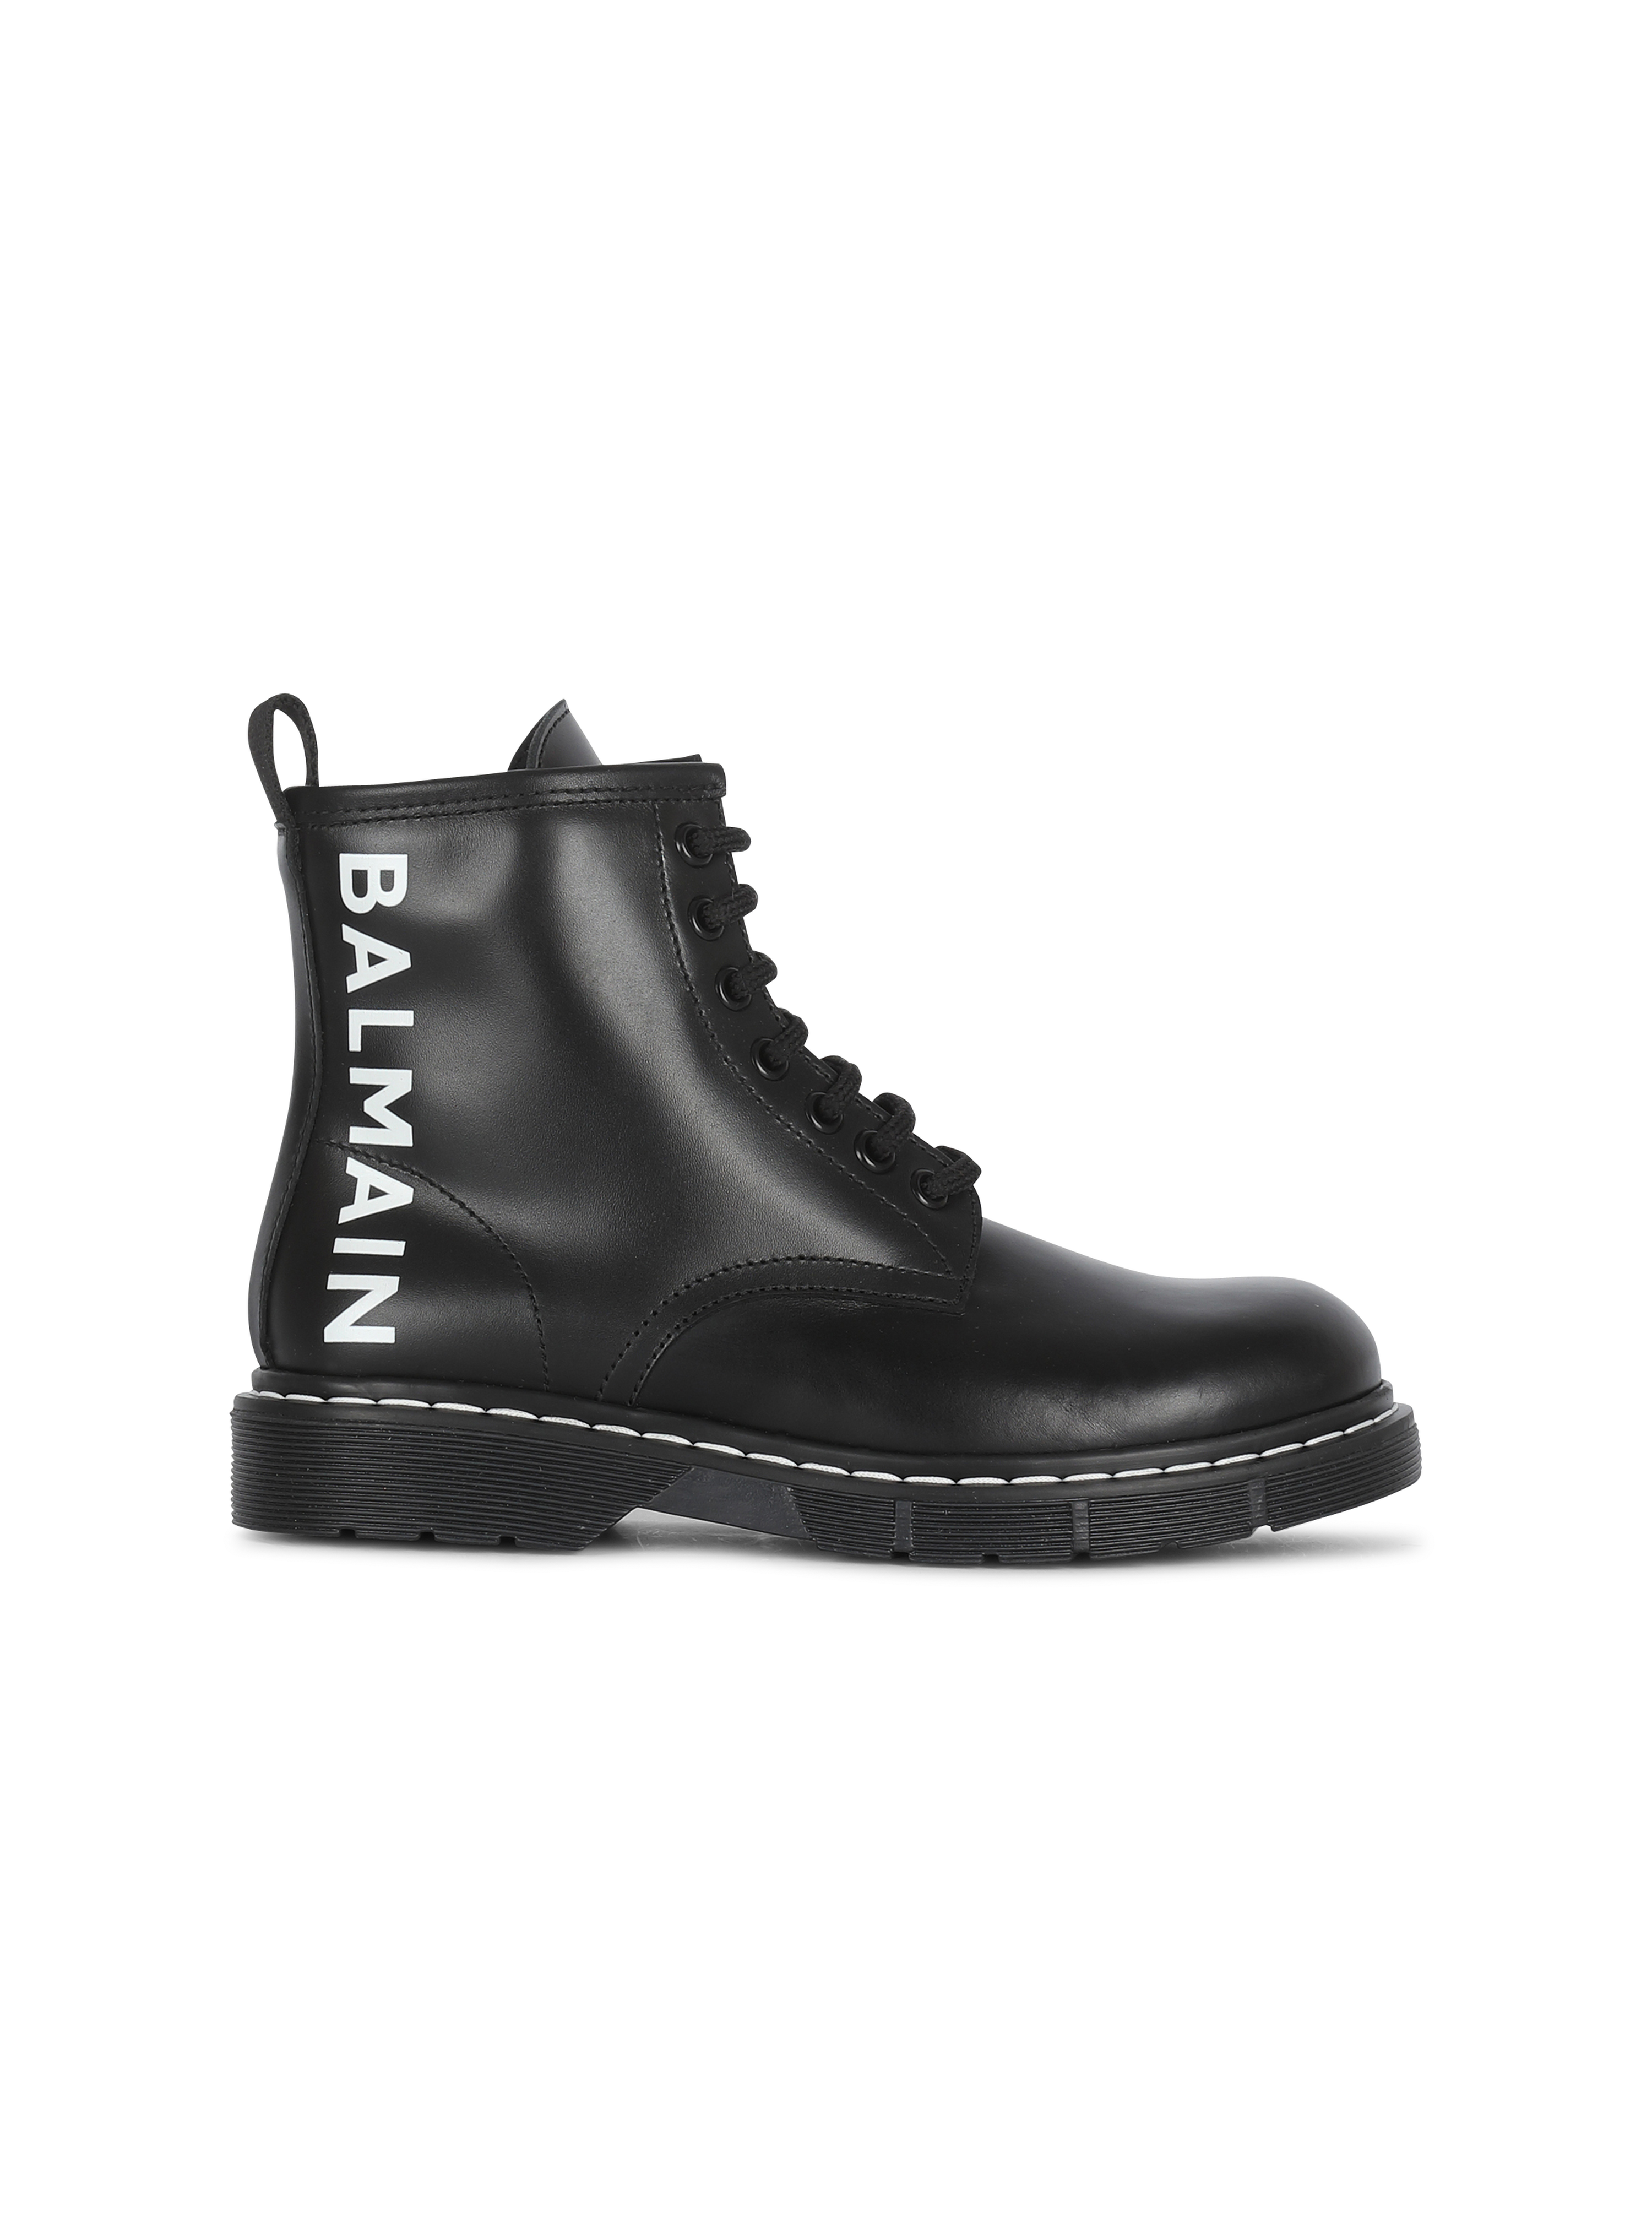 Leather ankle boots with Balmain logo, black